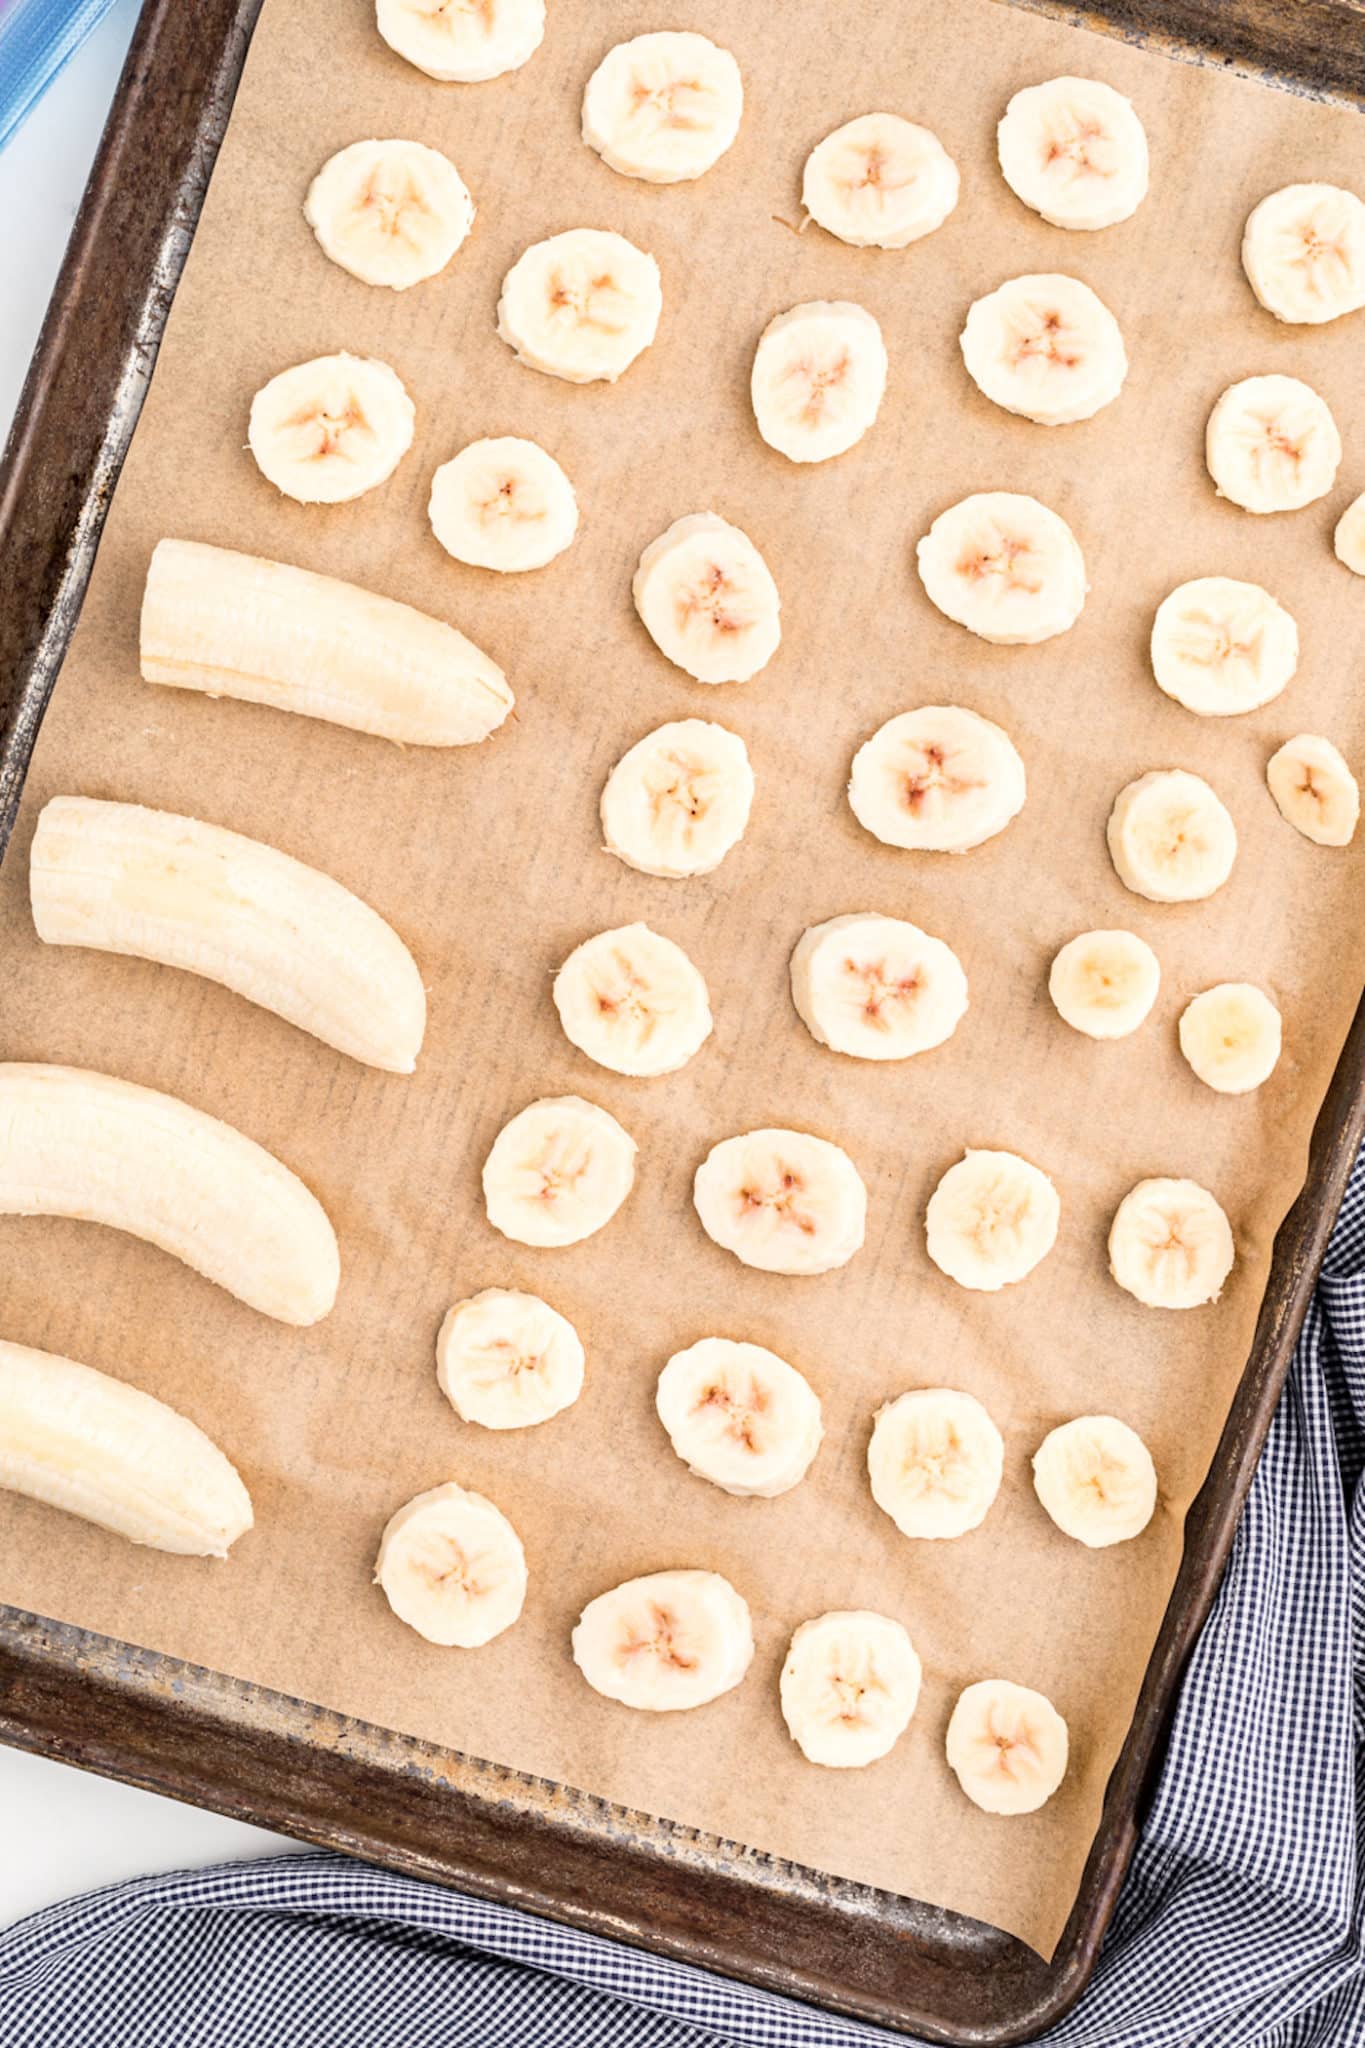 Banana halves and slices on a parchment-paper lined baking sheet.